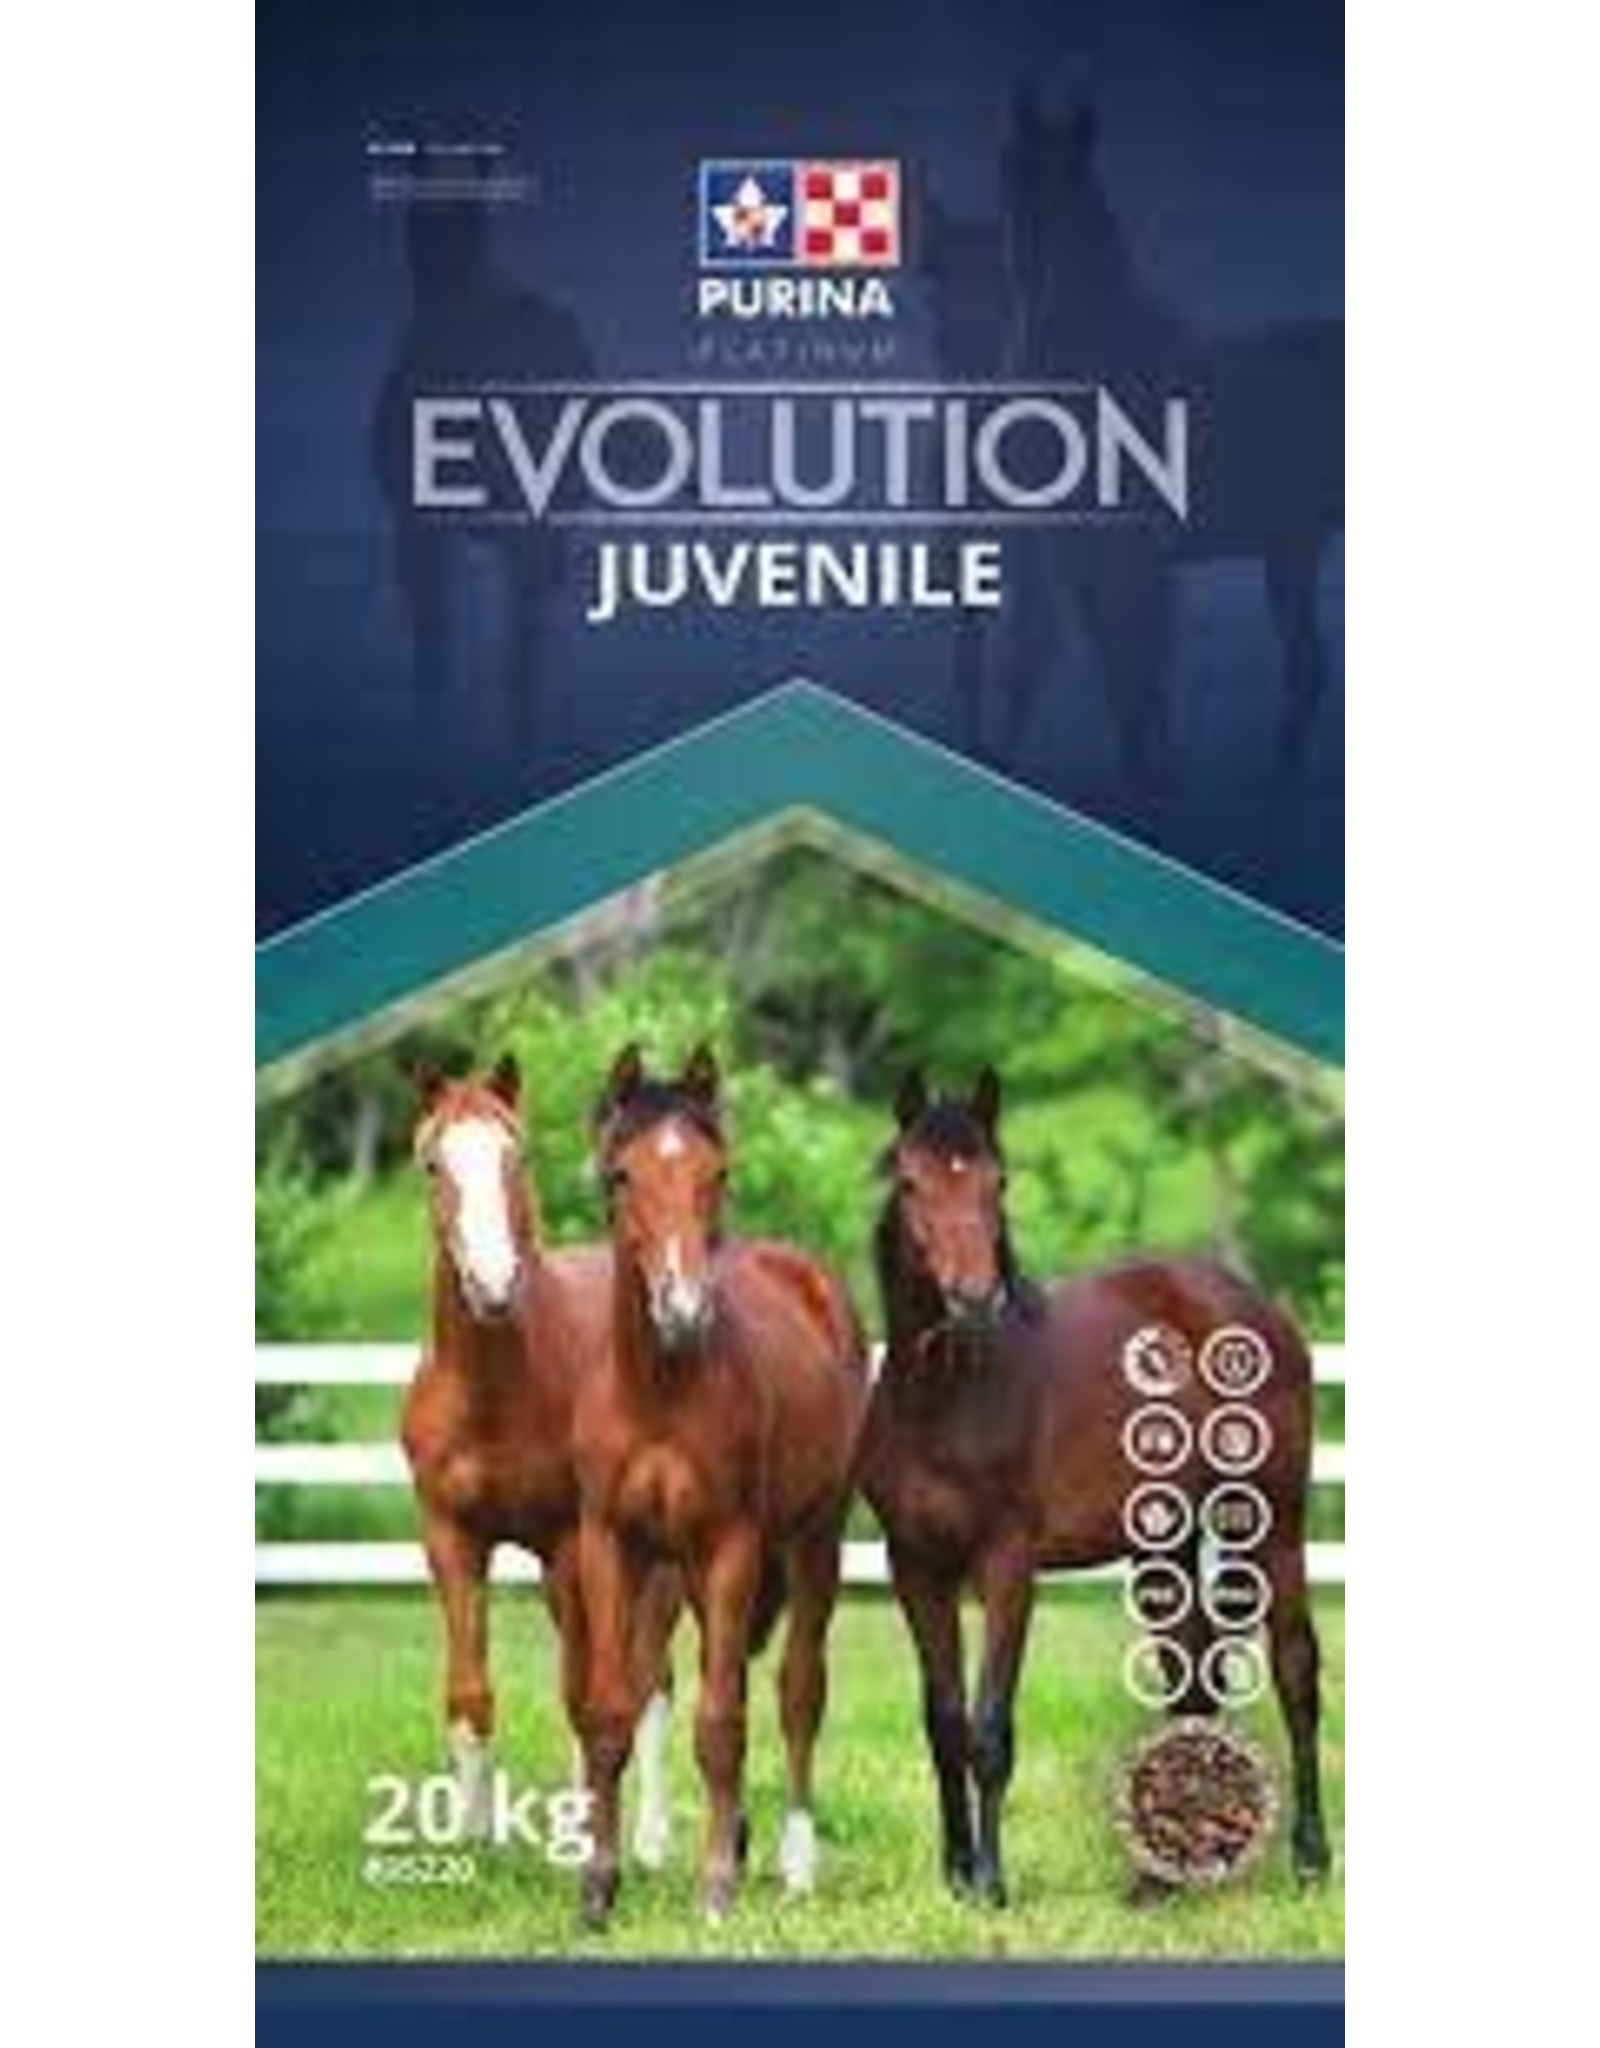 Purina PURINA EVOLUTION JUVENILE 20kg - NSC 20%  CP 15% - Fat 7% - Fiber 15%  - Recommended For Weanlings, Yearlings And Two Year Olds - CP35220. IN STORE